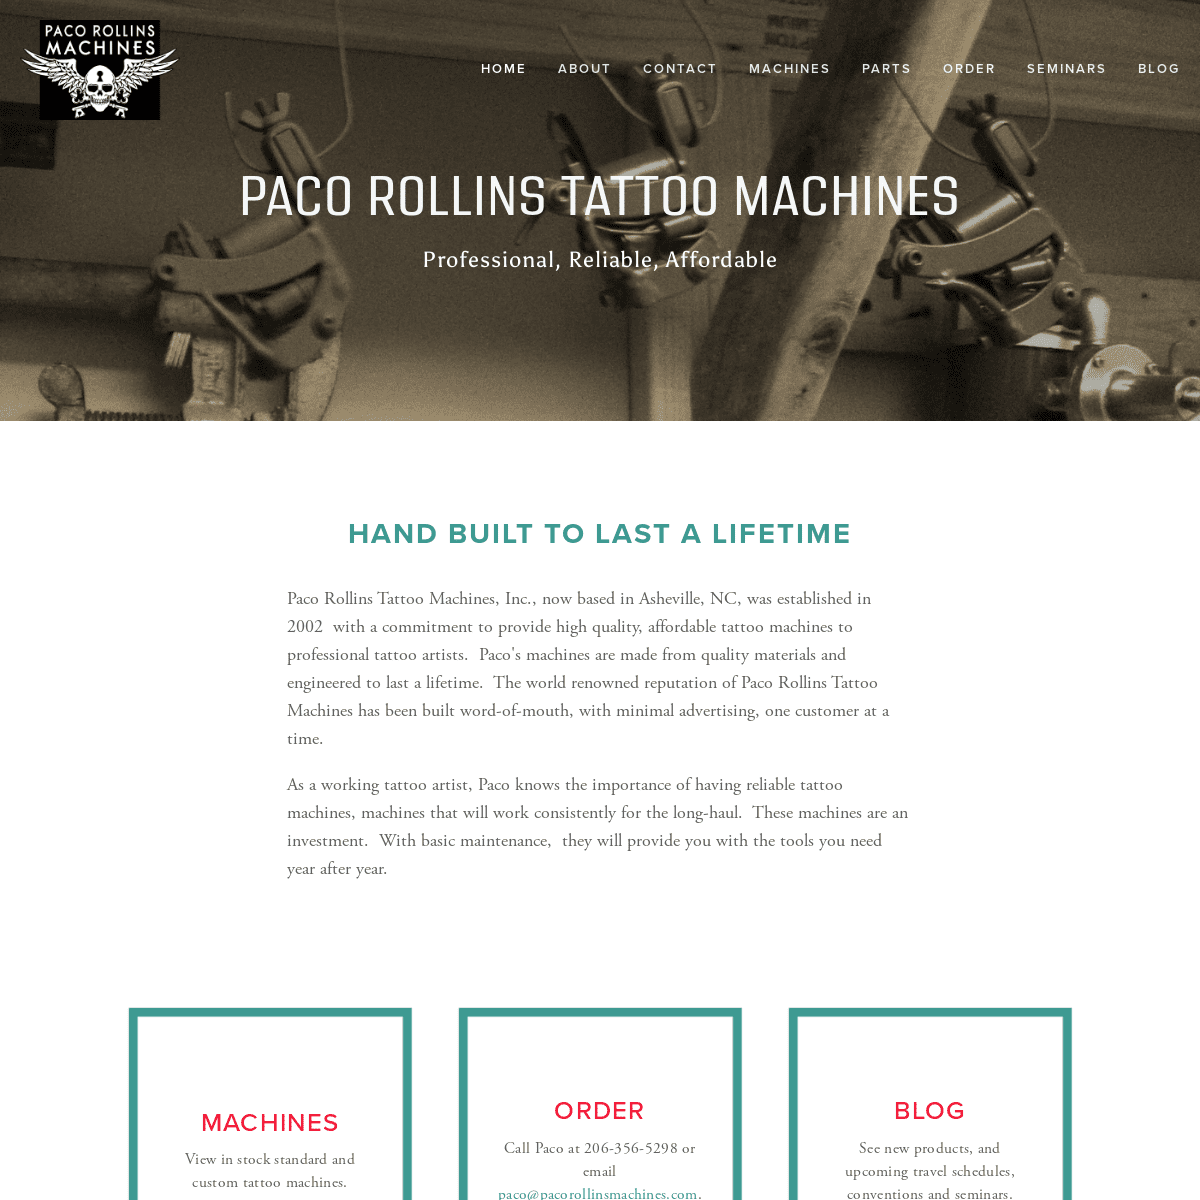 A complete backup of pacorollinsmachines.com